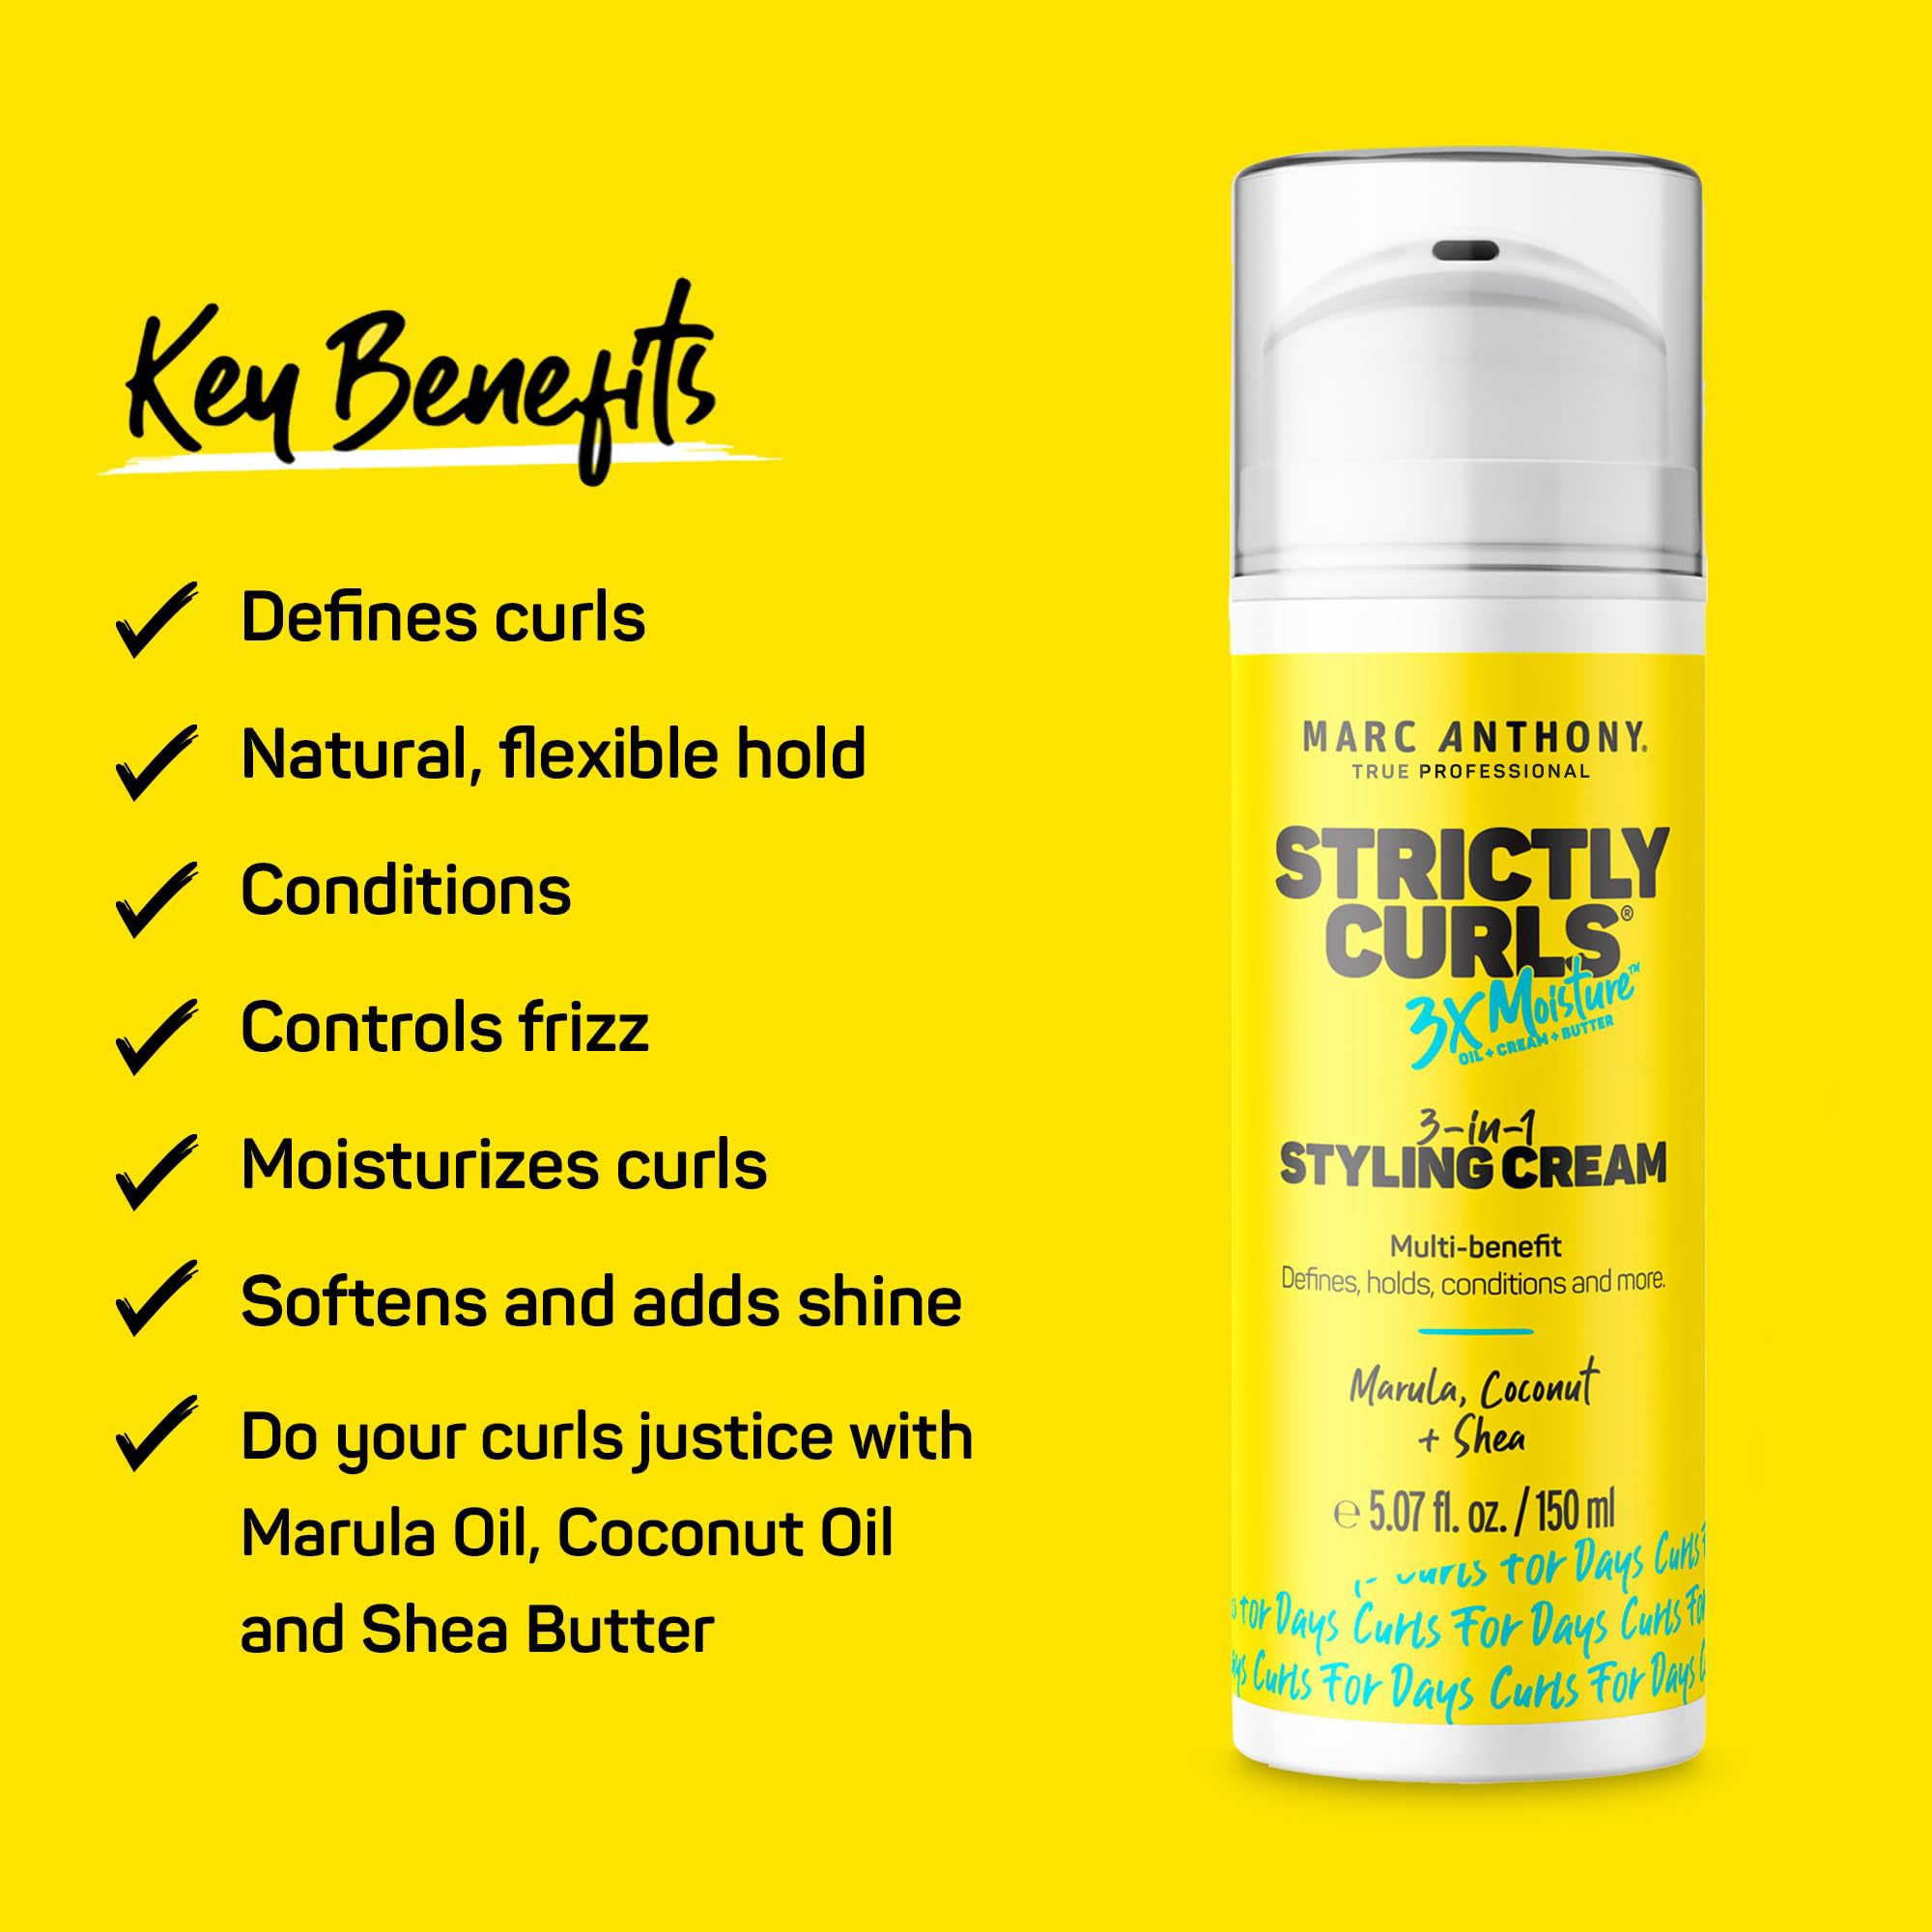 Strictly Curls® 3X Moisture <br> 3-in-1 Styling Cream